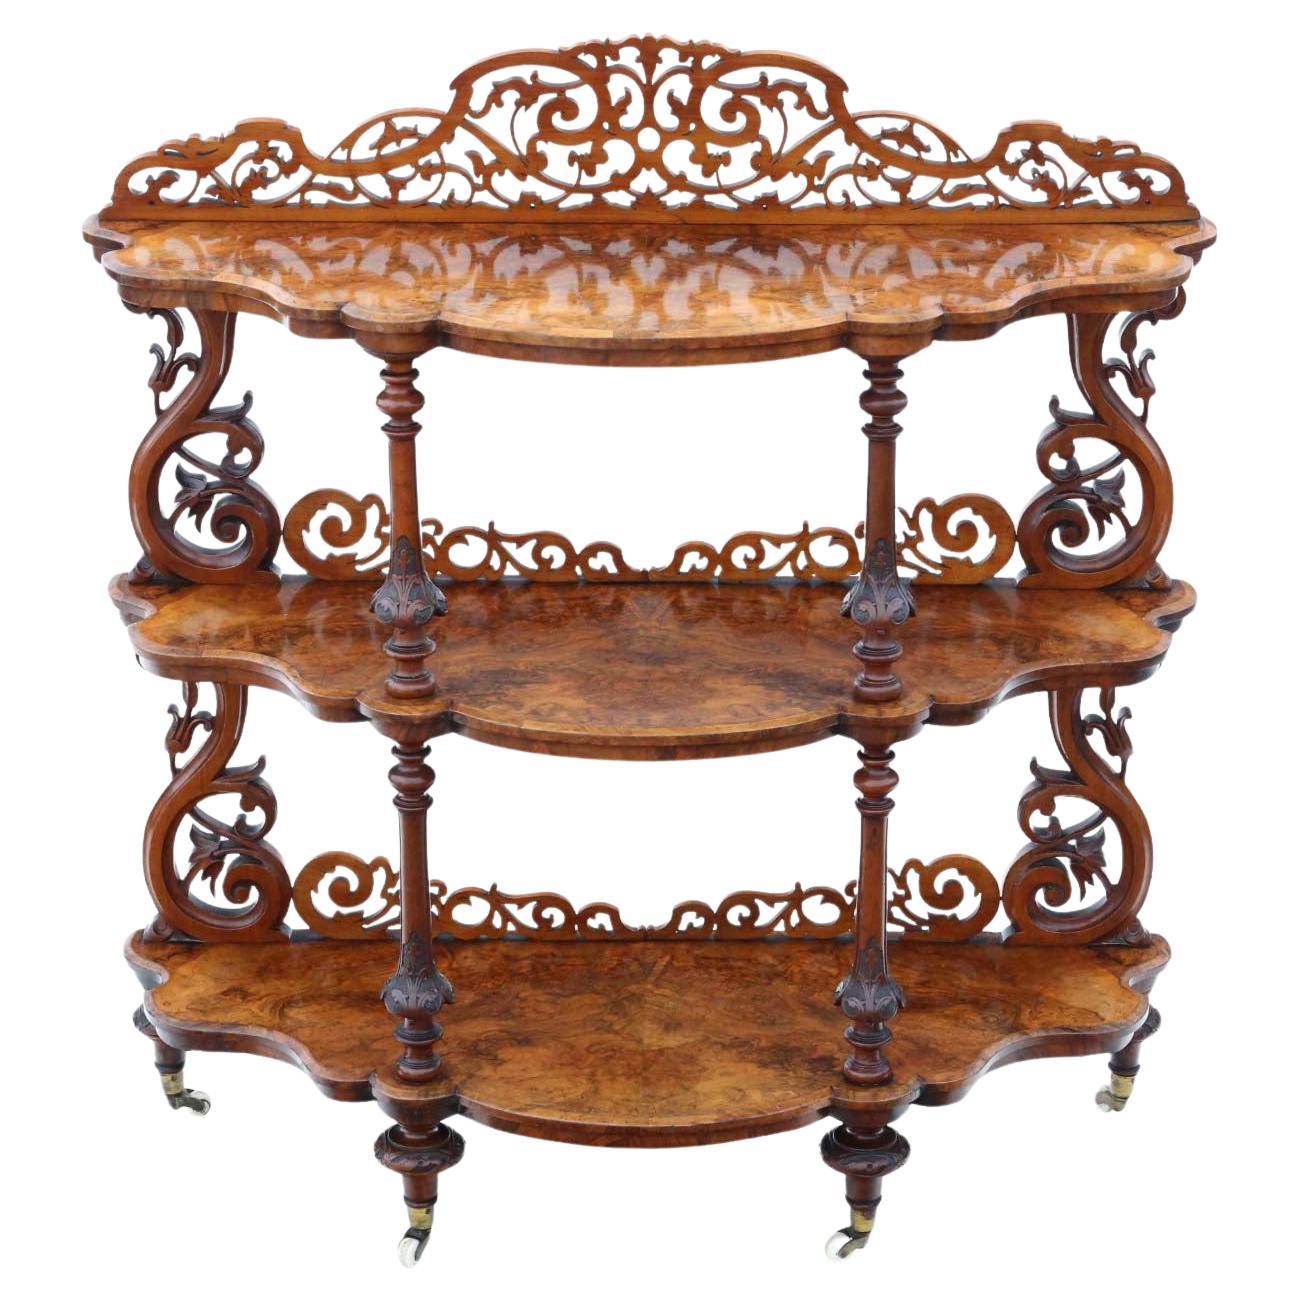 19th Century Burr Walnut Demi-Lune Console Table Quality Antique display serving